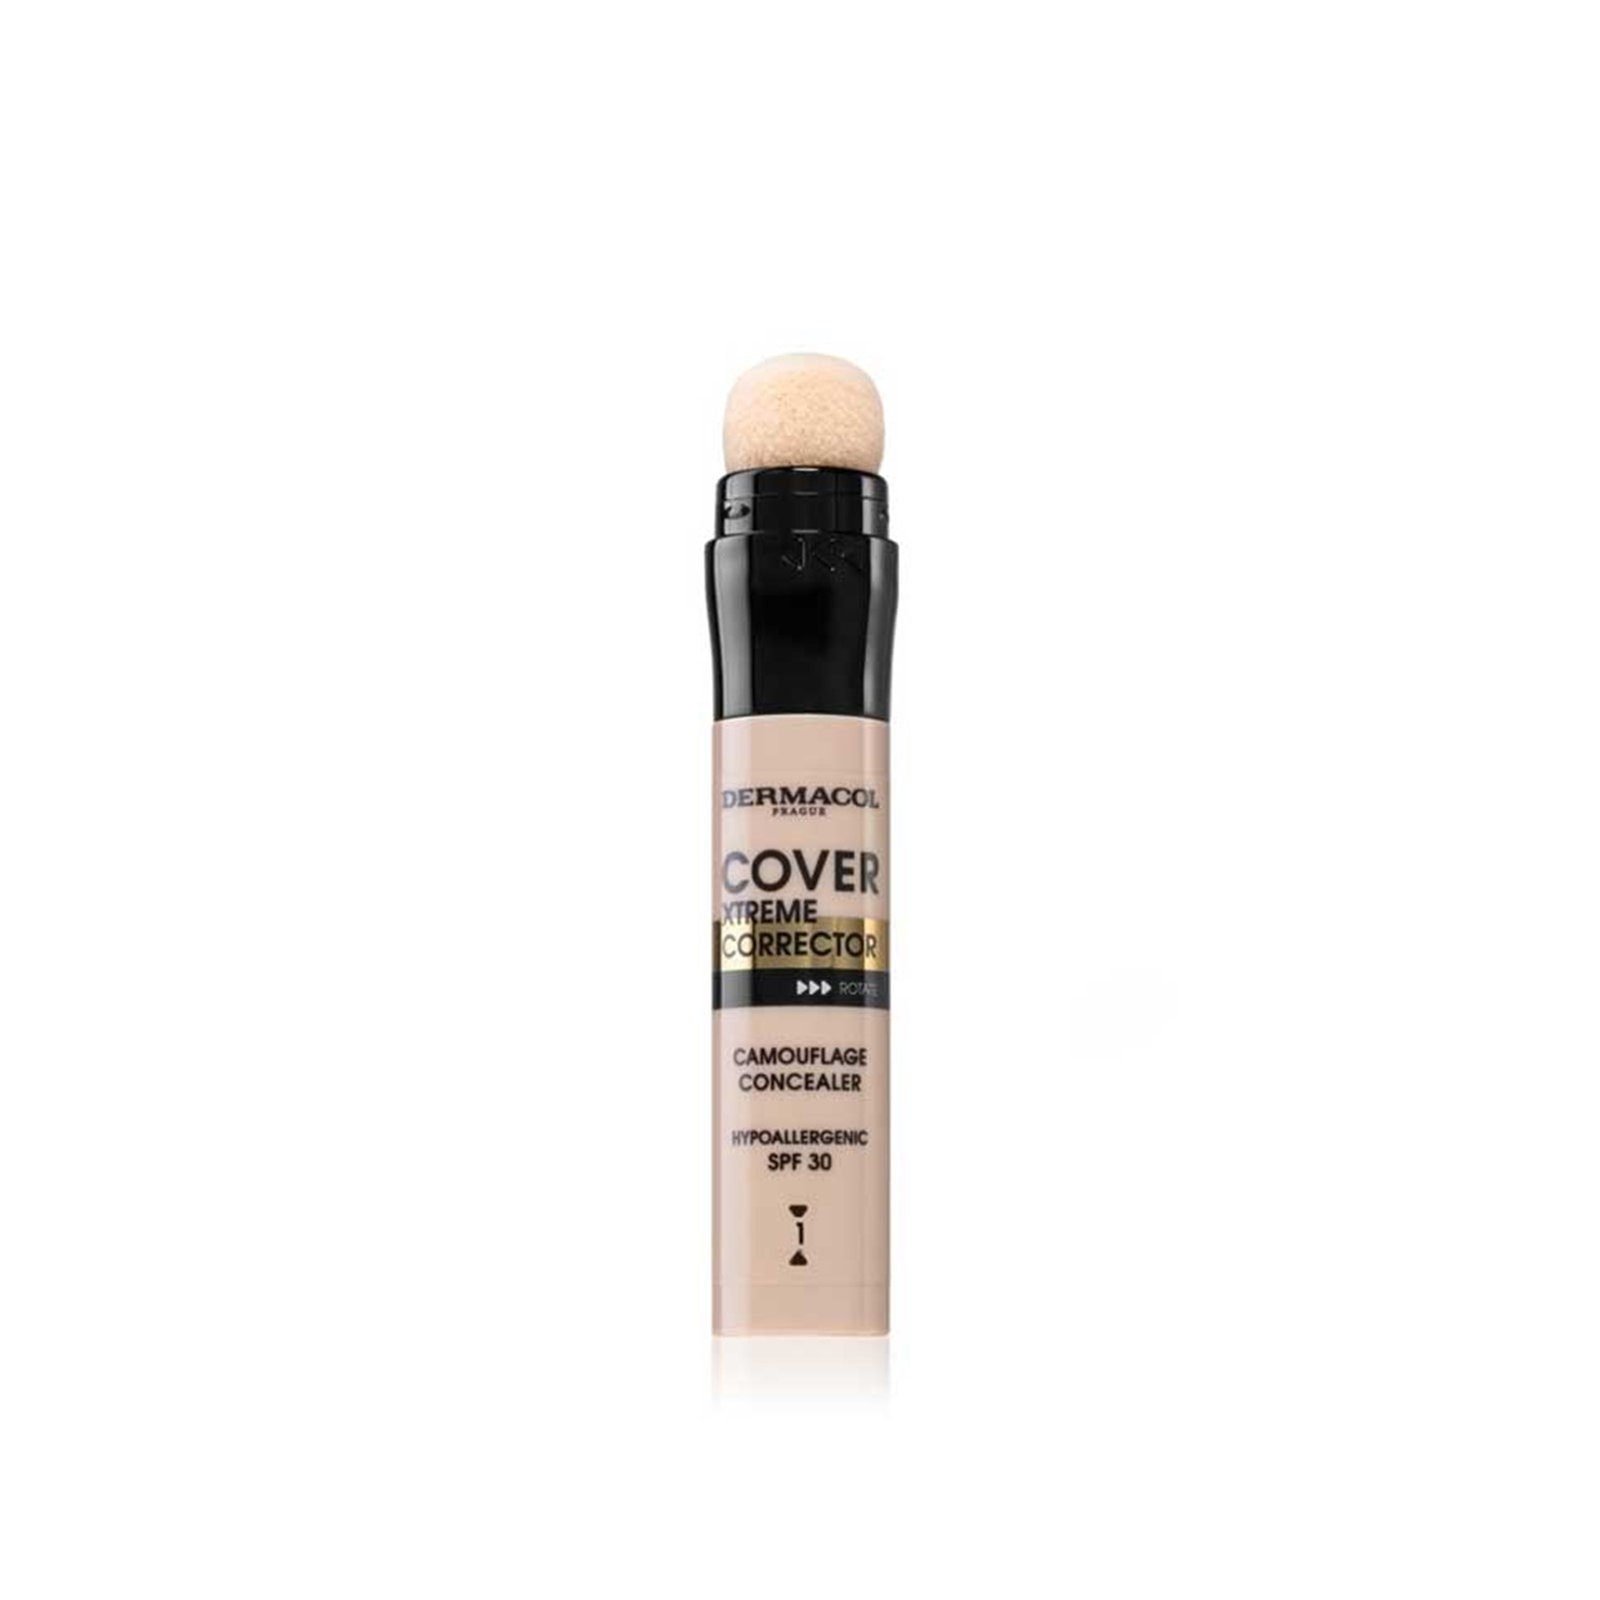 Dermacol Cover Xtreme Corrector 1 SPF30 8g